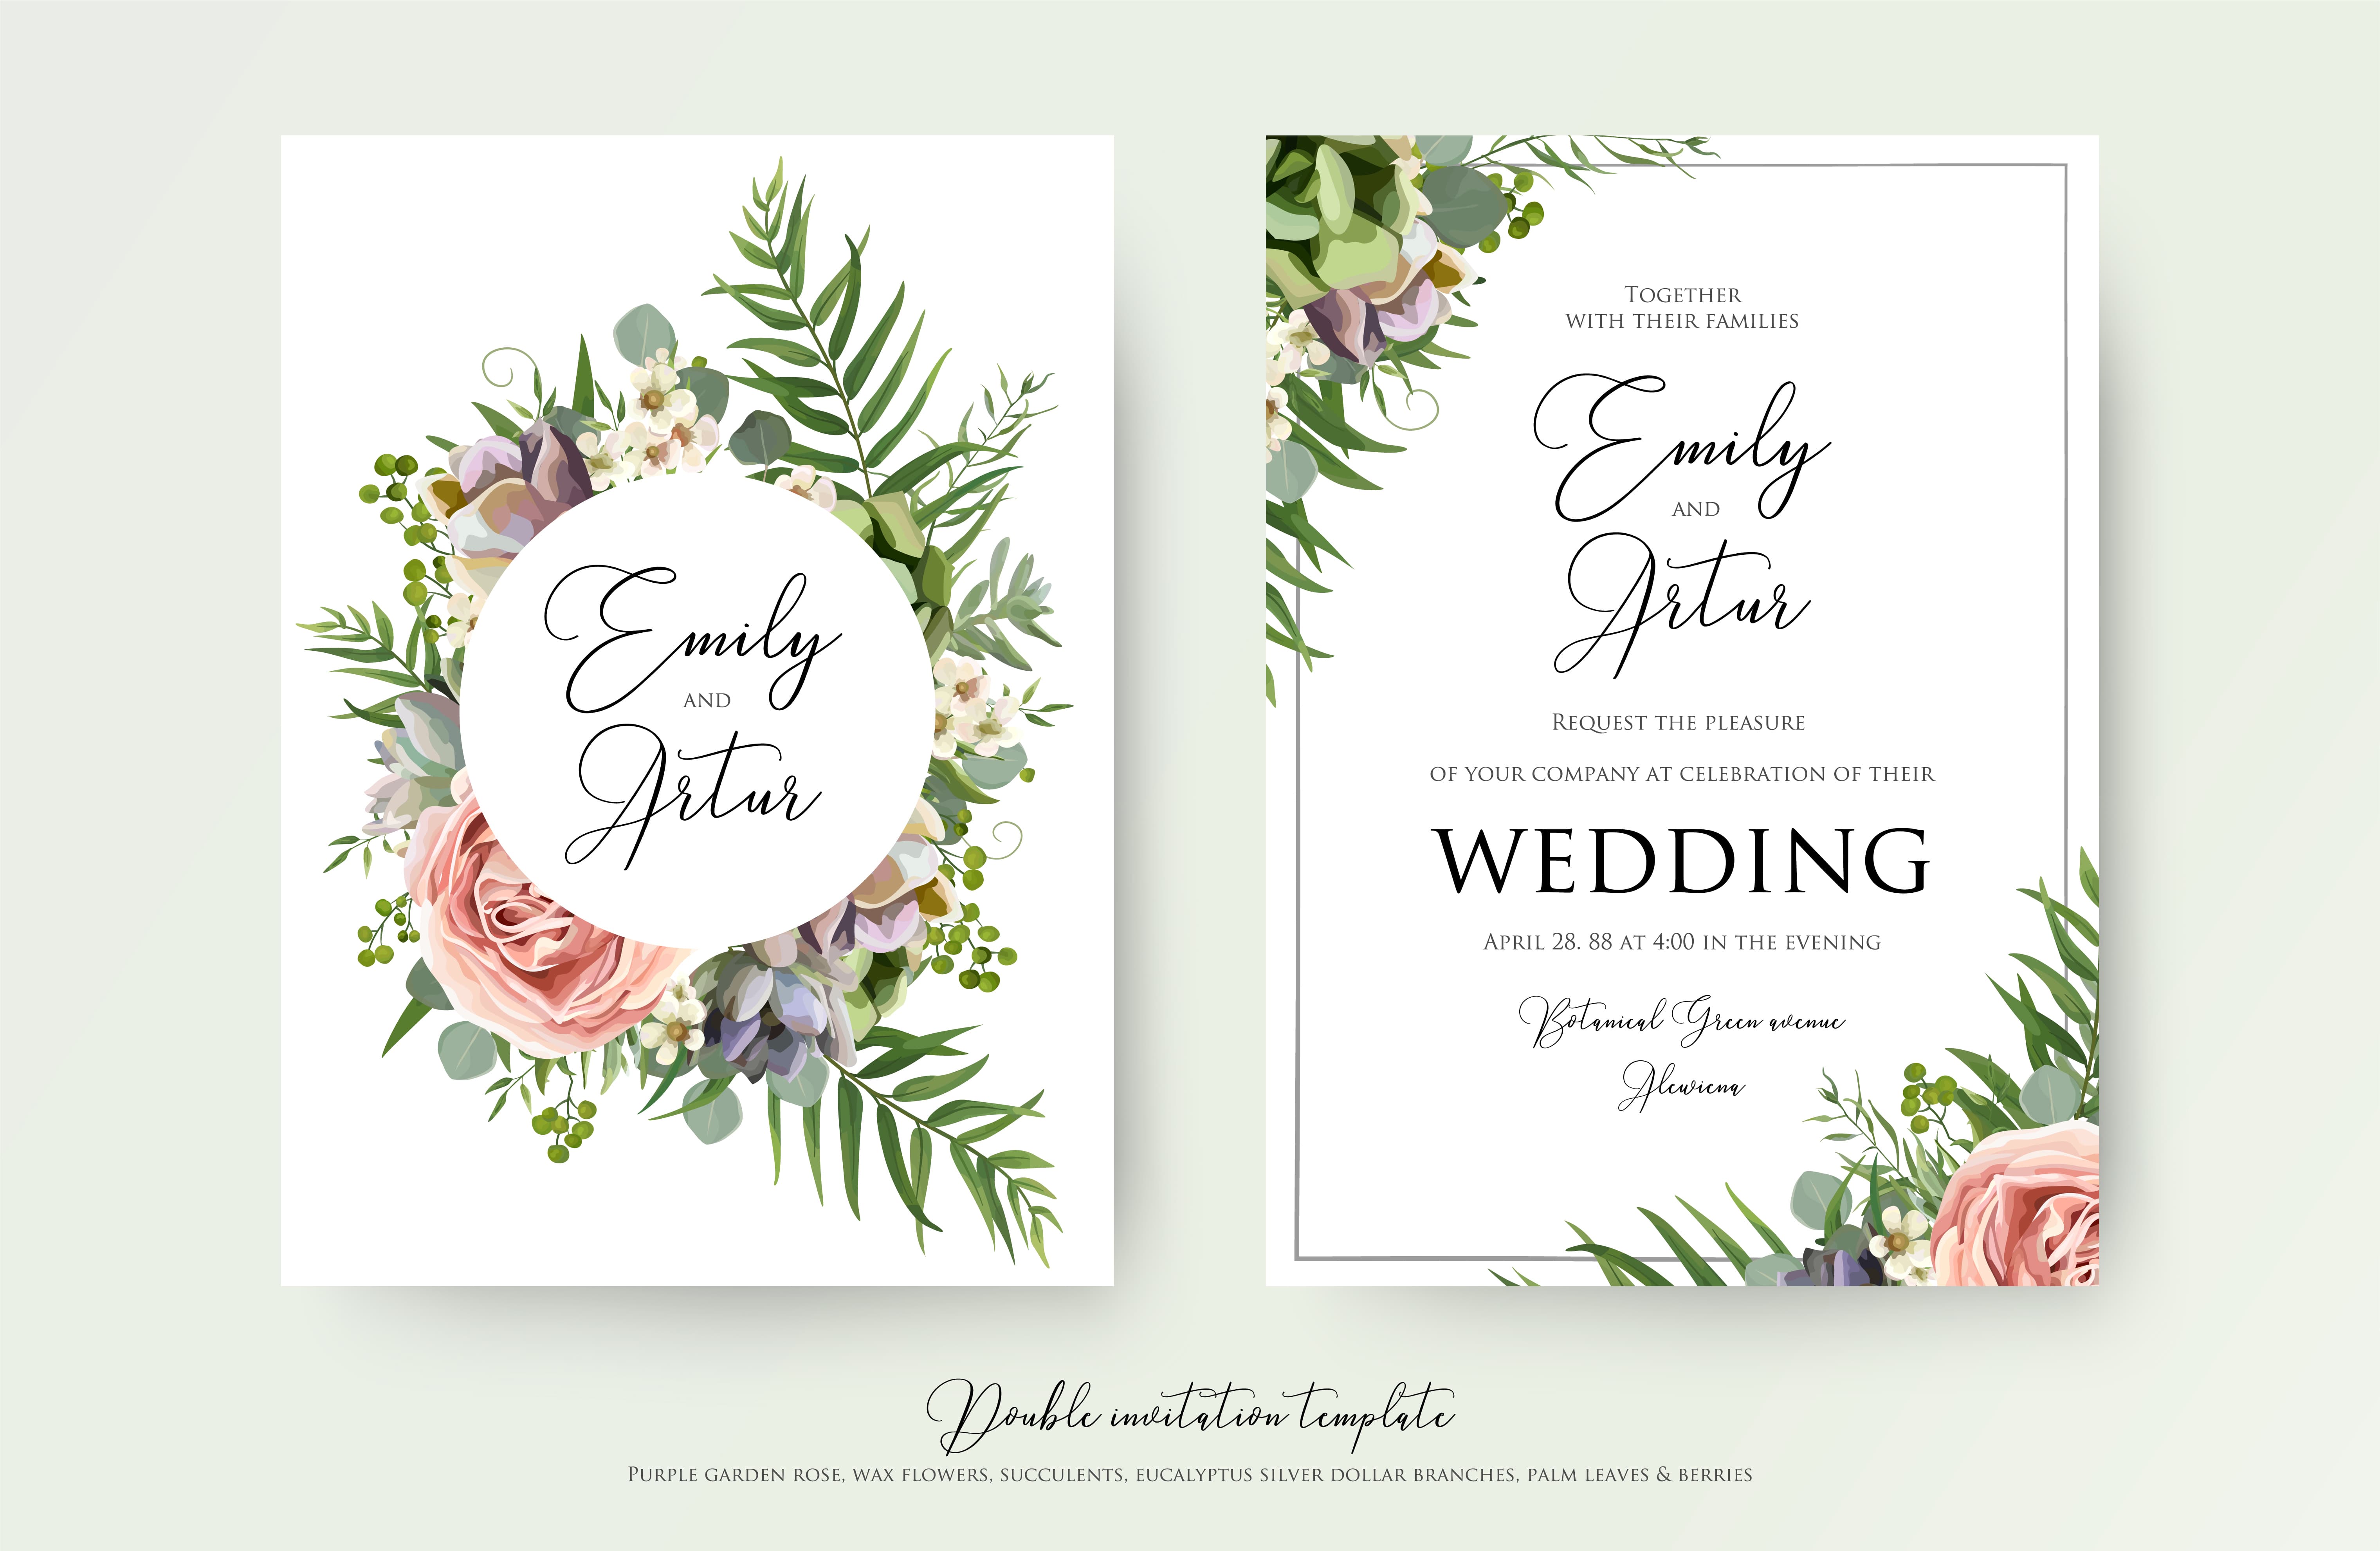 Turnaround Time for Printing Wedding Invitations In London